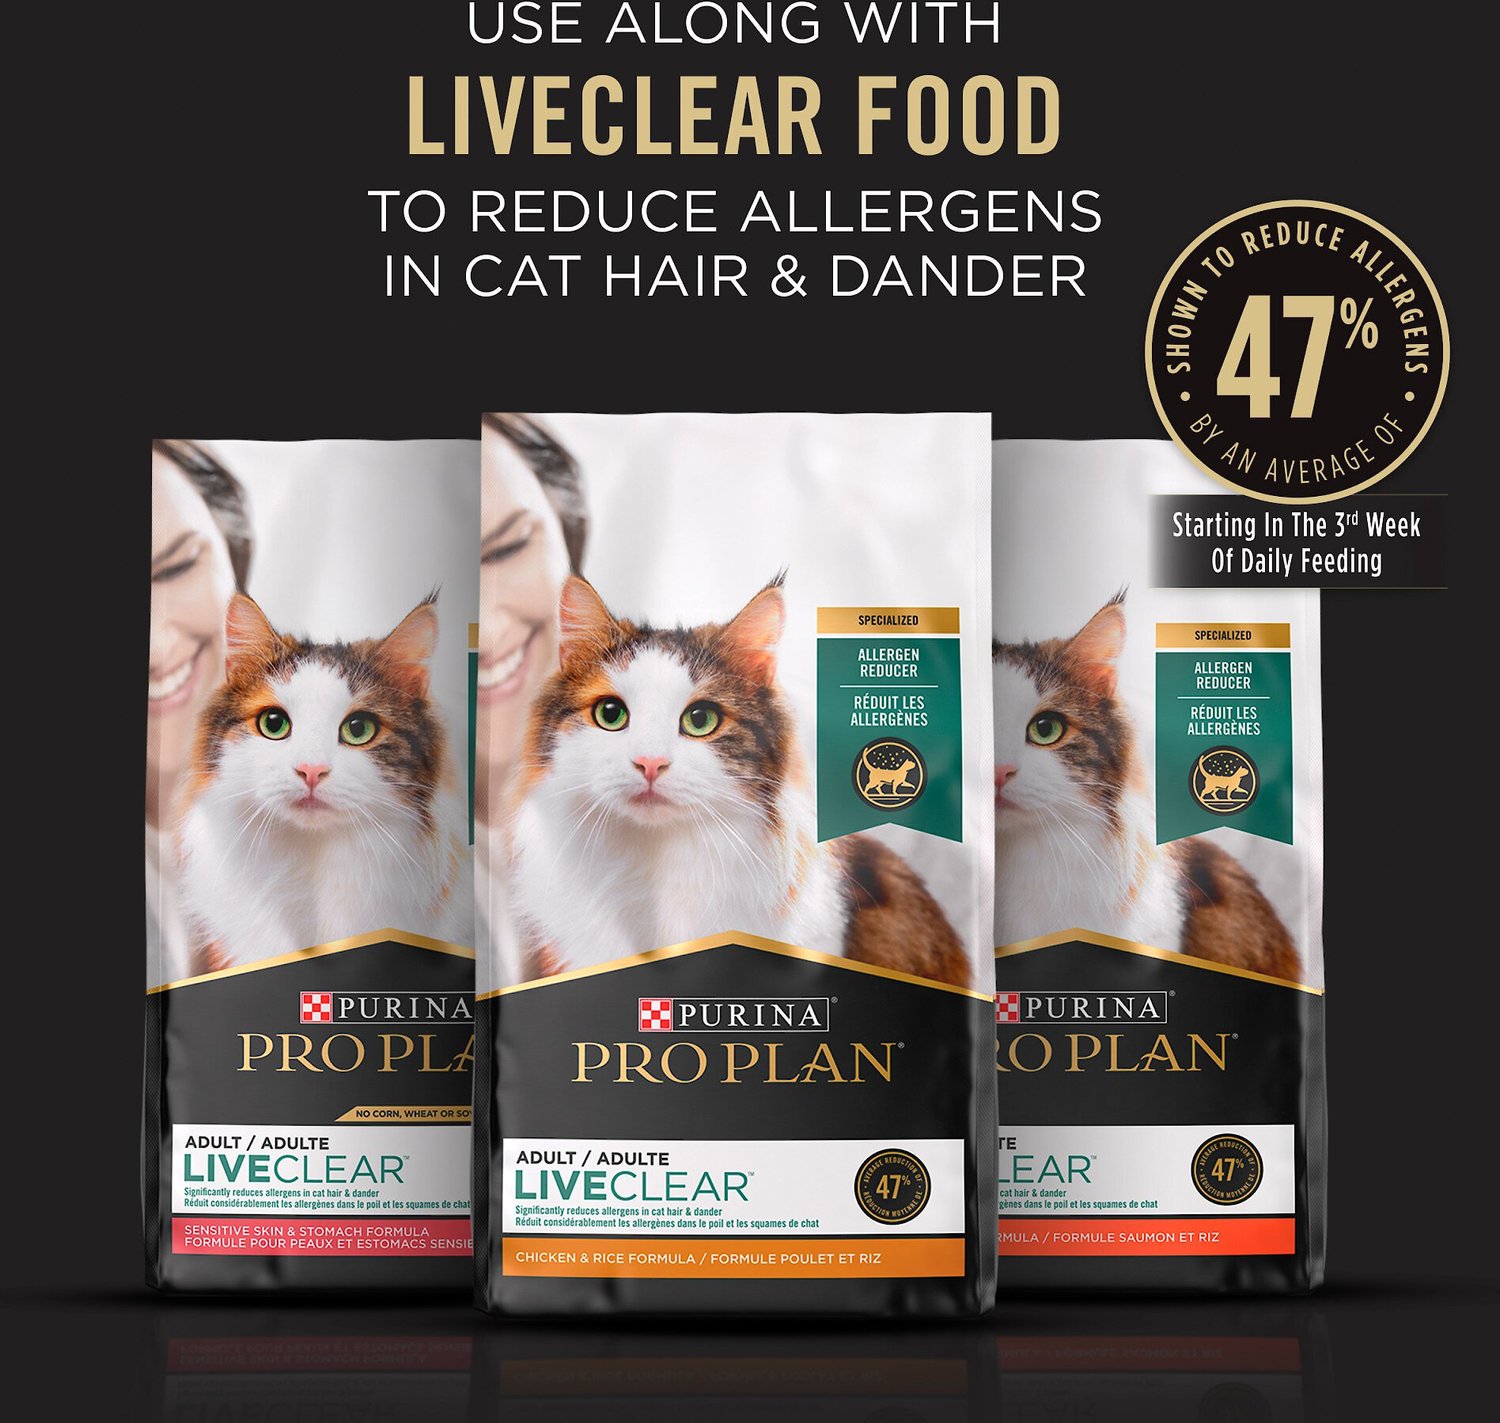 Purina Pro Plan liveclear 2020.